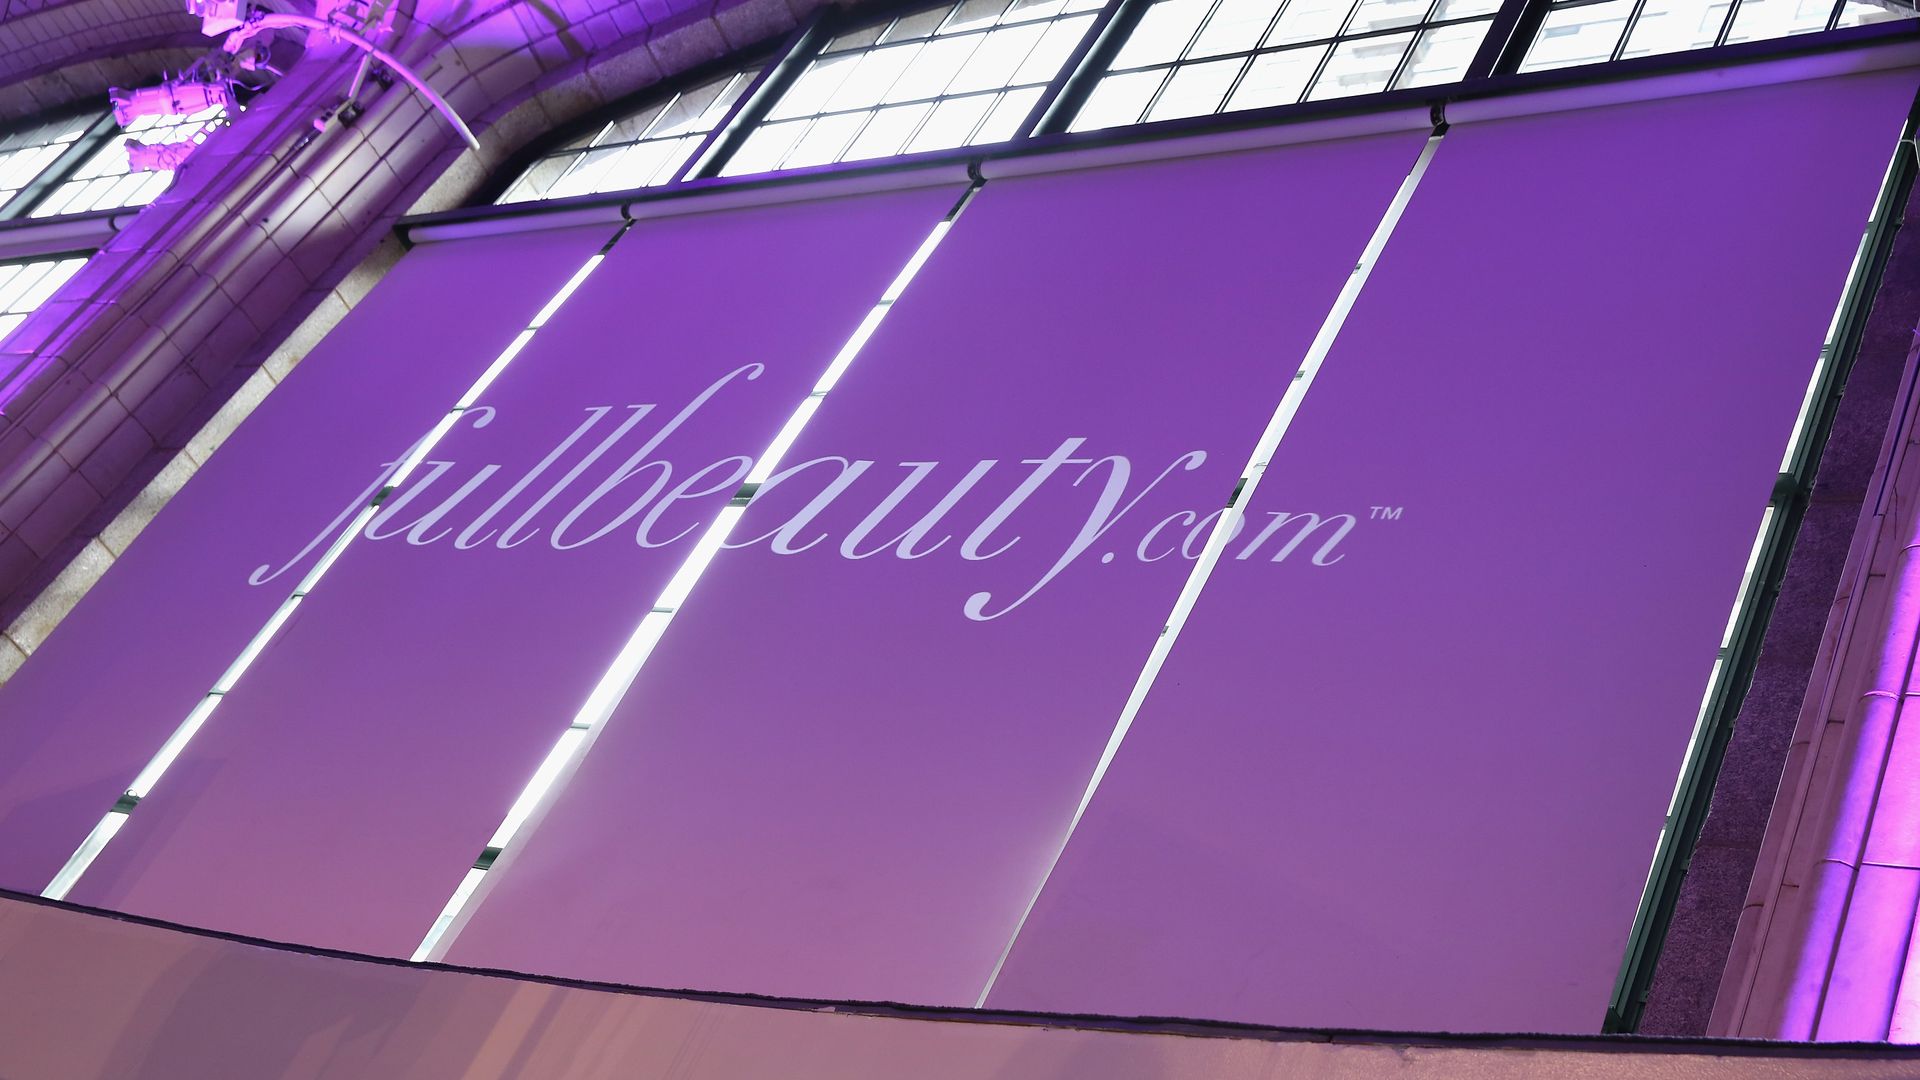 A canvas sign advertising apparel retailer Fullbeauty's website, with white lettering on a lilac background.